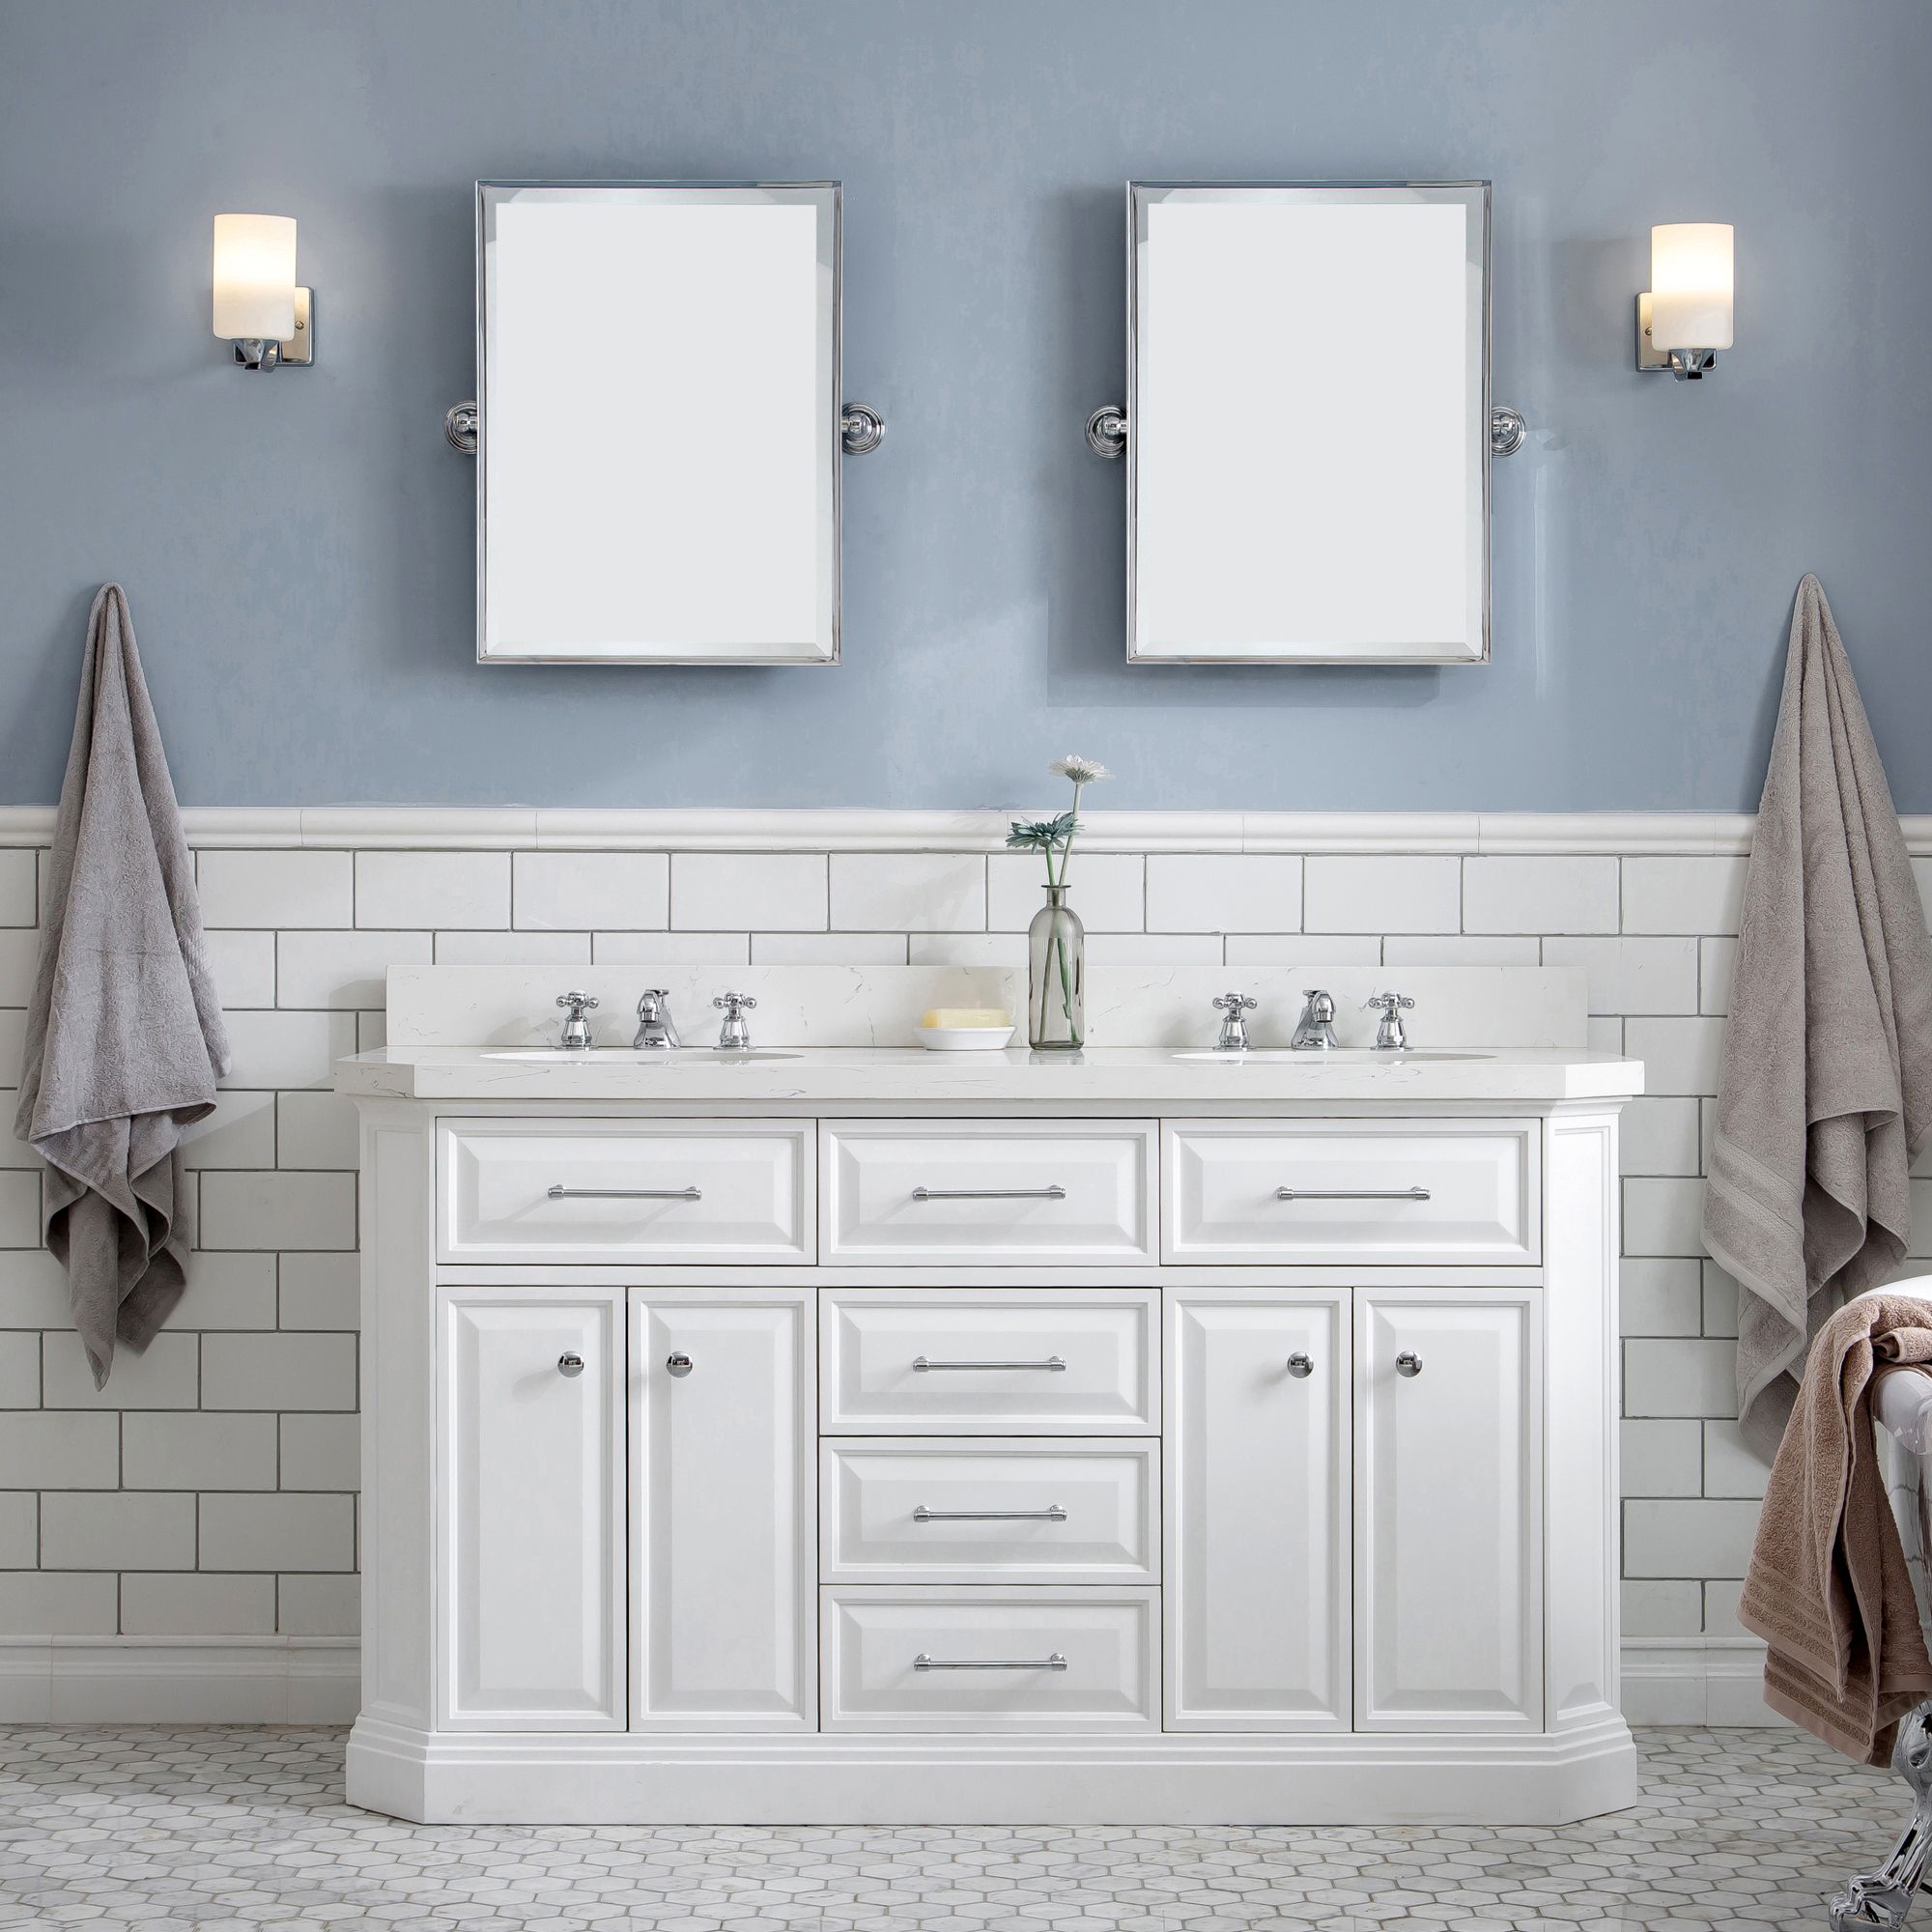 60" Traditional Collection Quartz Carrara Pure White Bathroom Vanity Set With Hardware in Chrome Finish